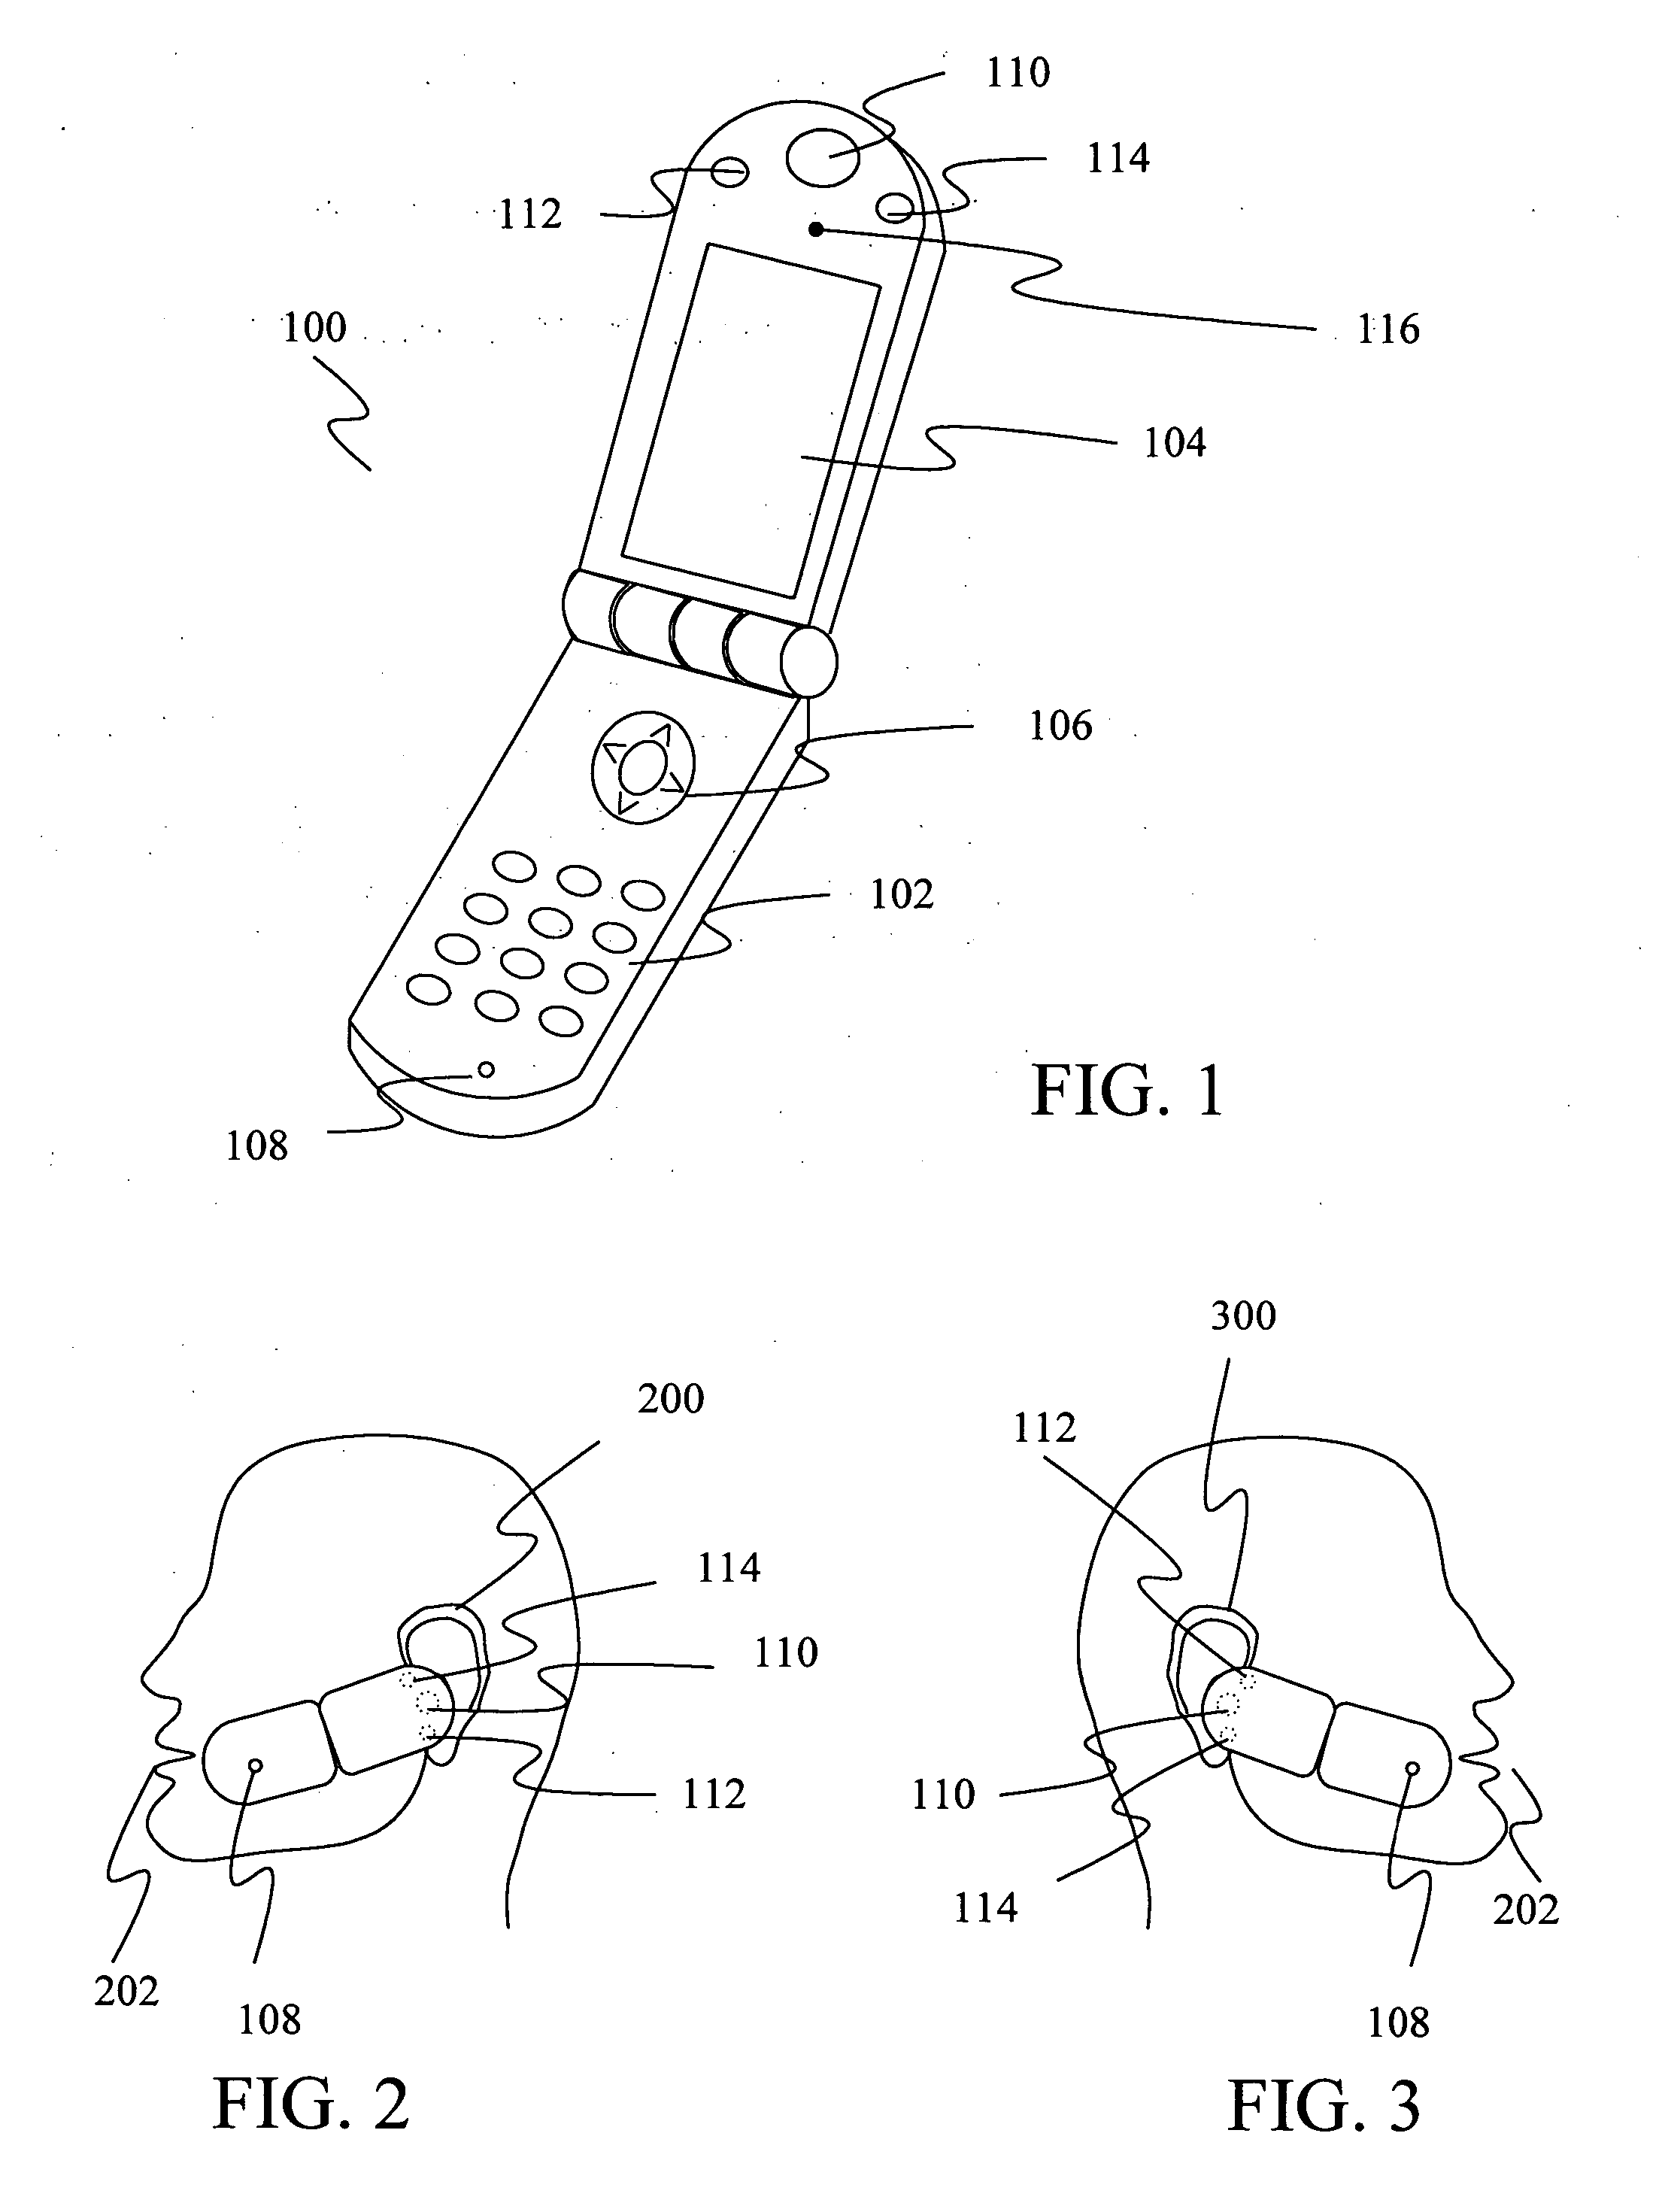 Method and apparatus for multi-sensory speech enhancement on a mobile device